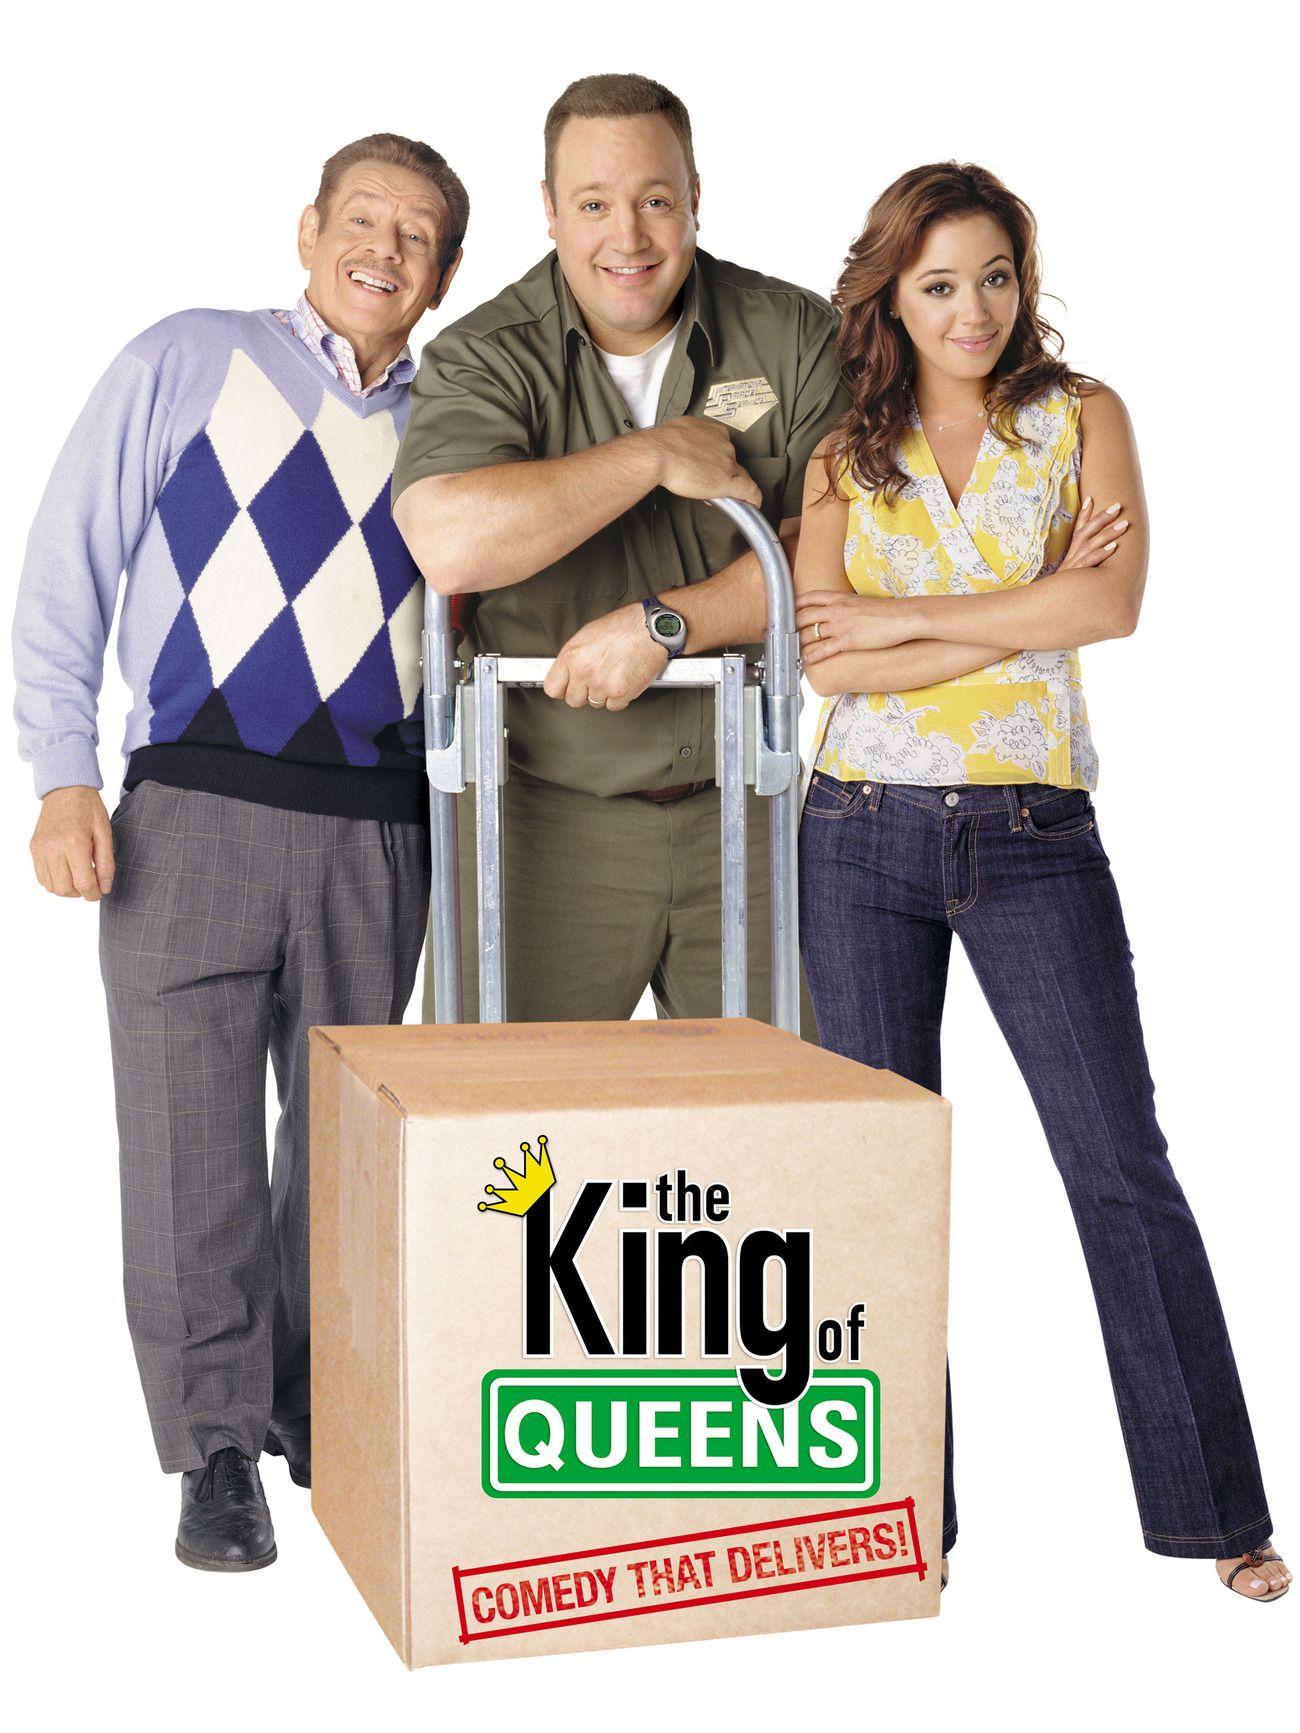 The King of Queens Logo - King Of Queens TV Show: News, Videos, Full Episodes and More